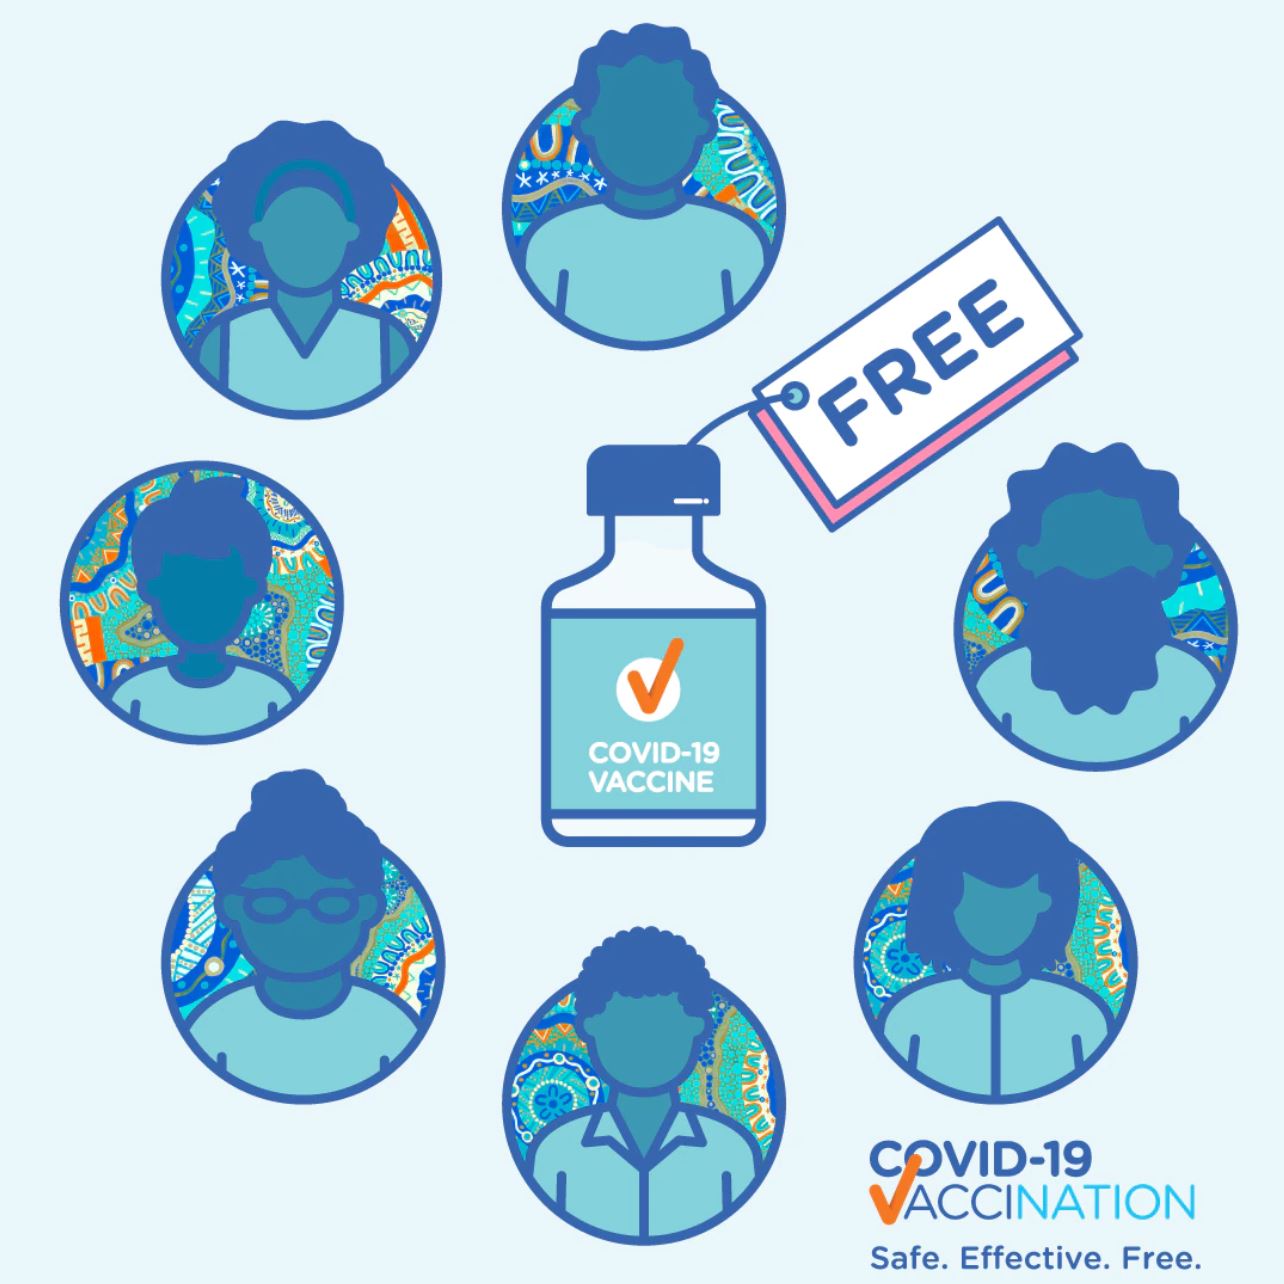 Guide for developing COVID-19 vaccine communication materials